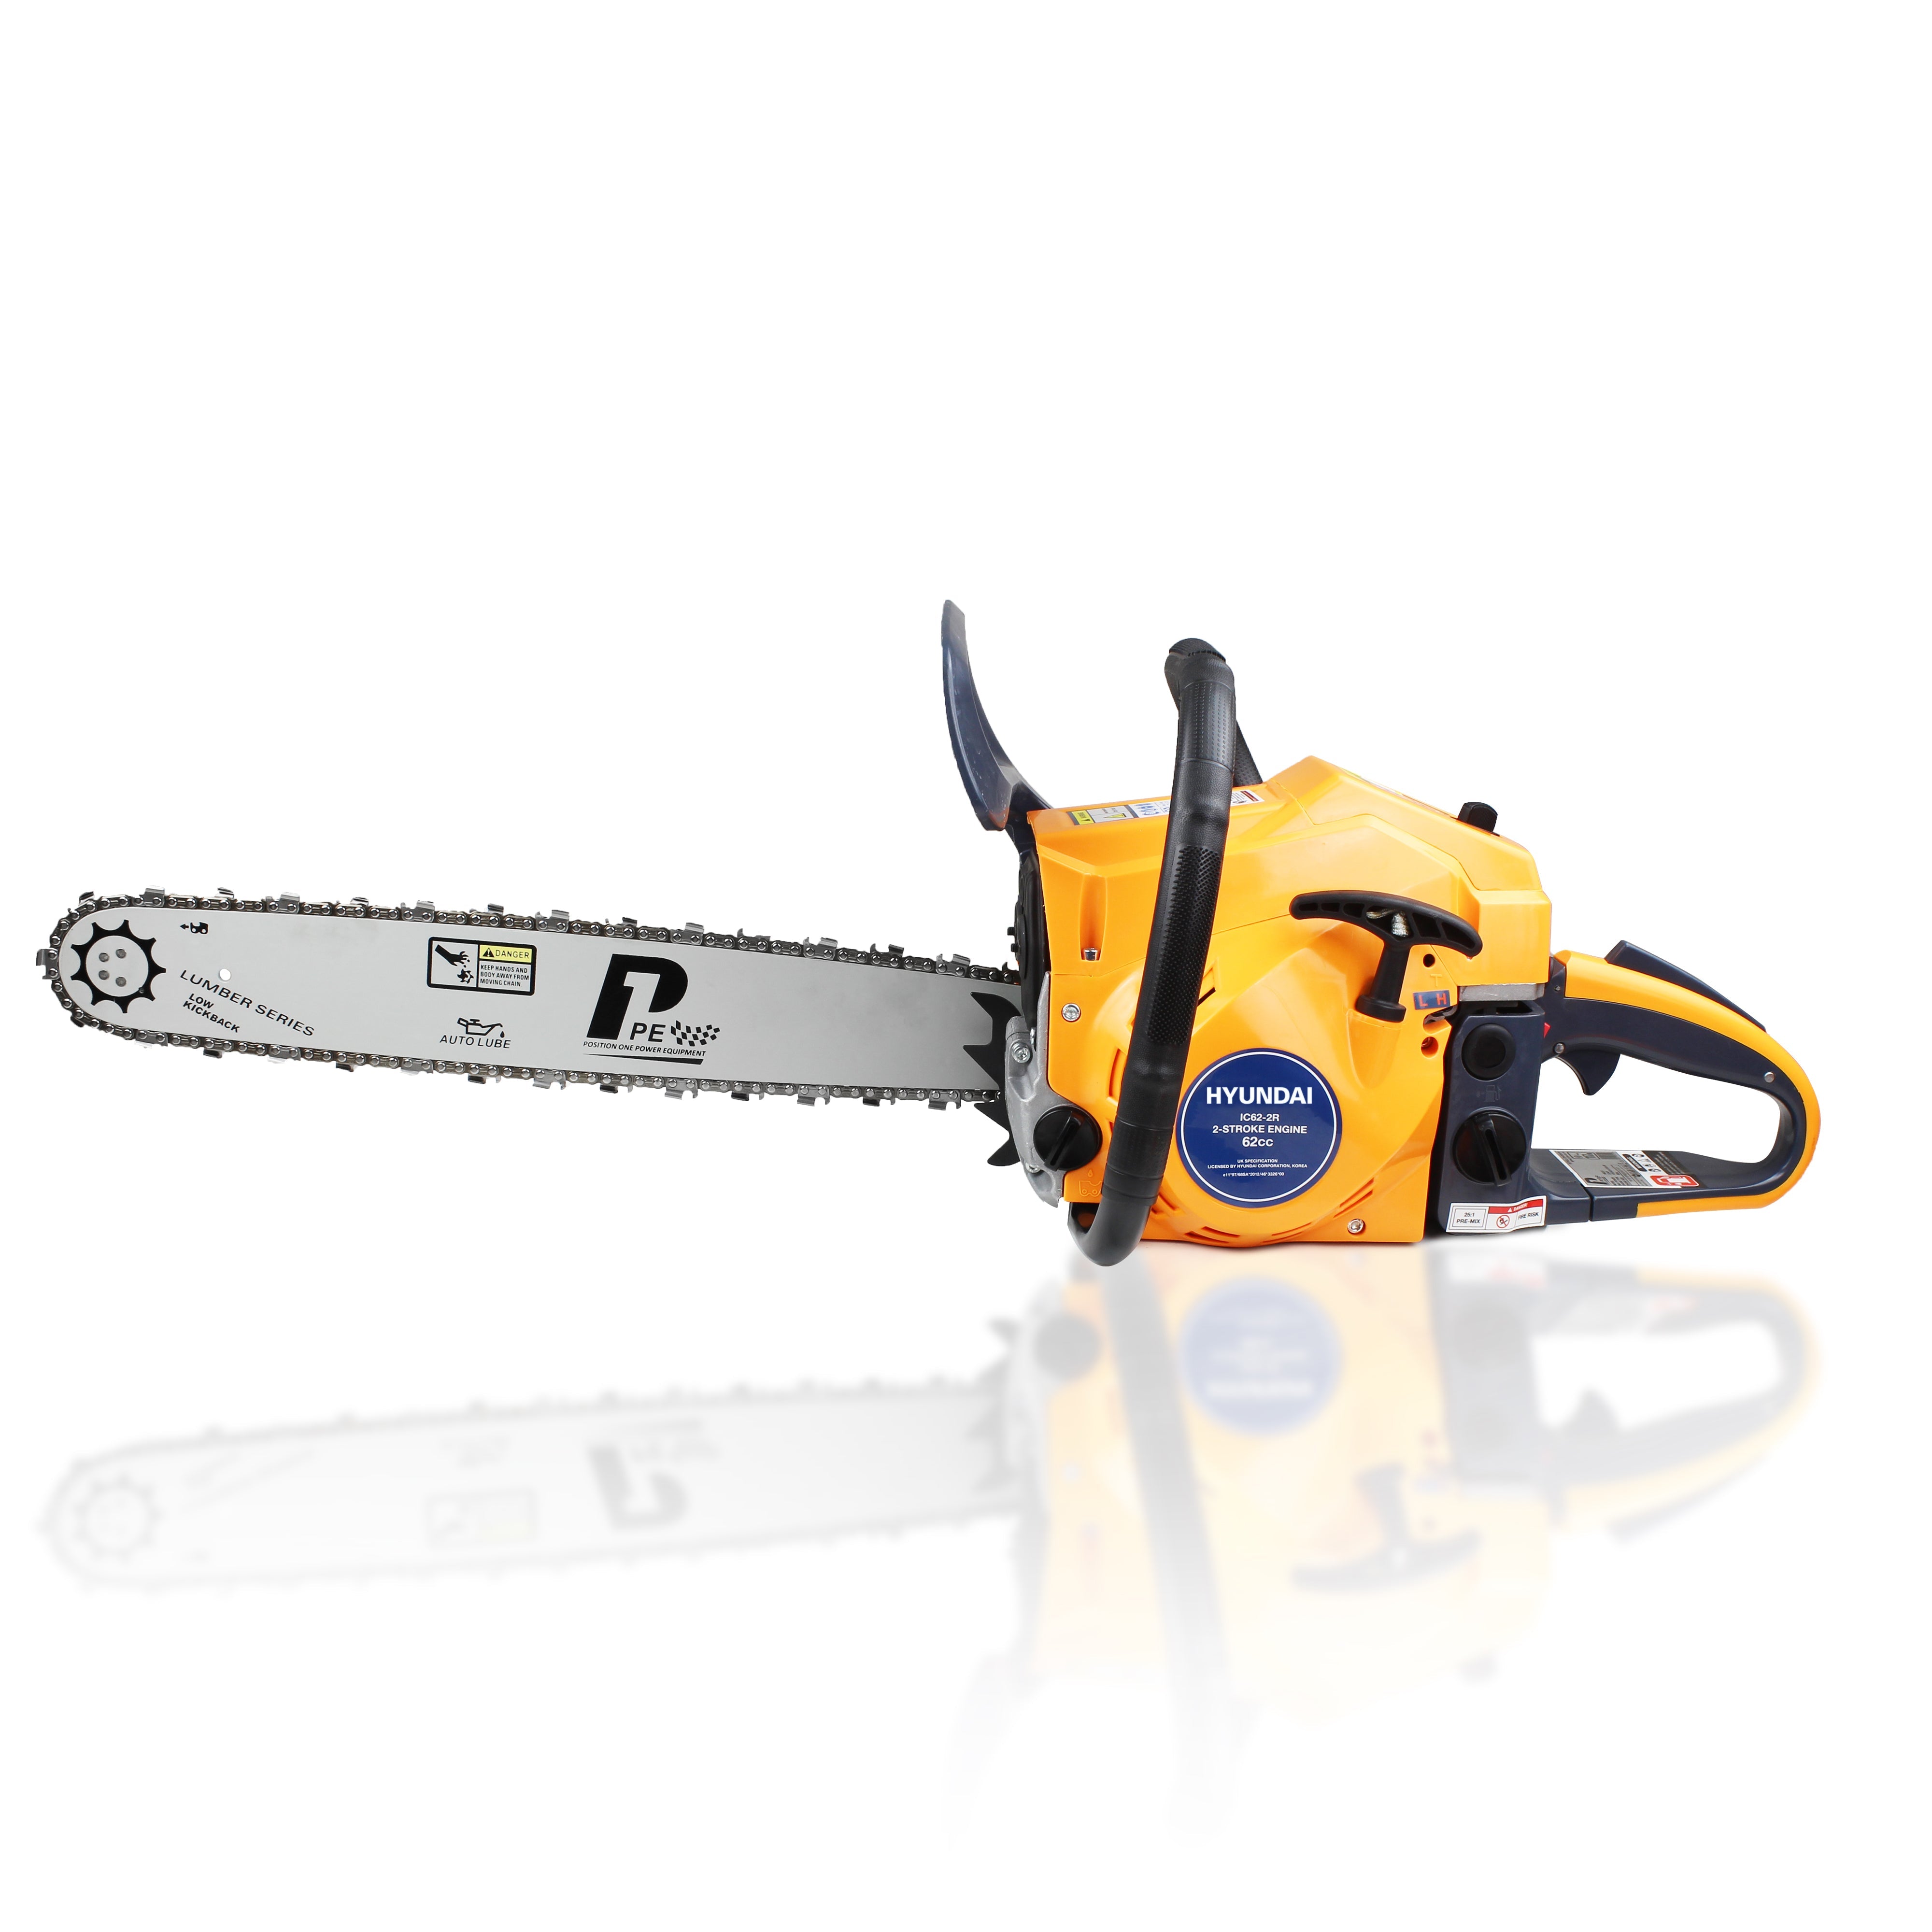 P1 Petrol Chainsaw with 62cc Hyundai Engine, 20" Bar, Easy-Start - Includes 2 Chains and Bag | P6220C